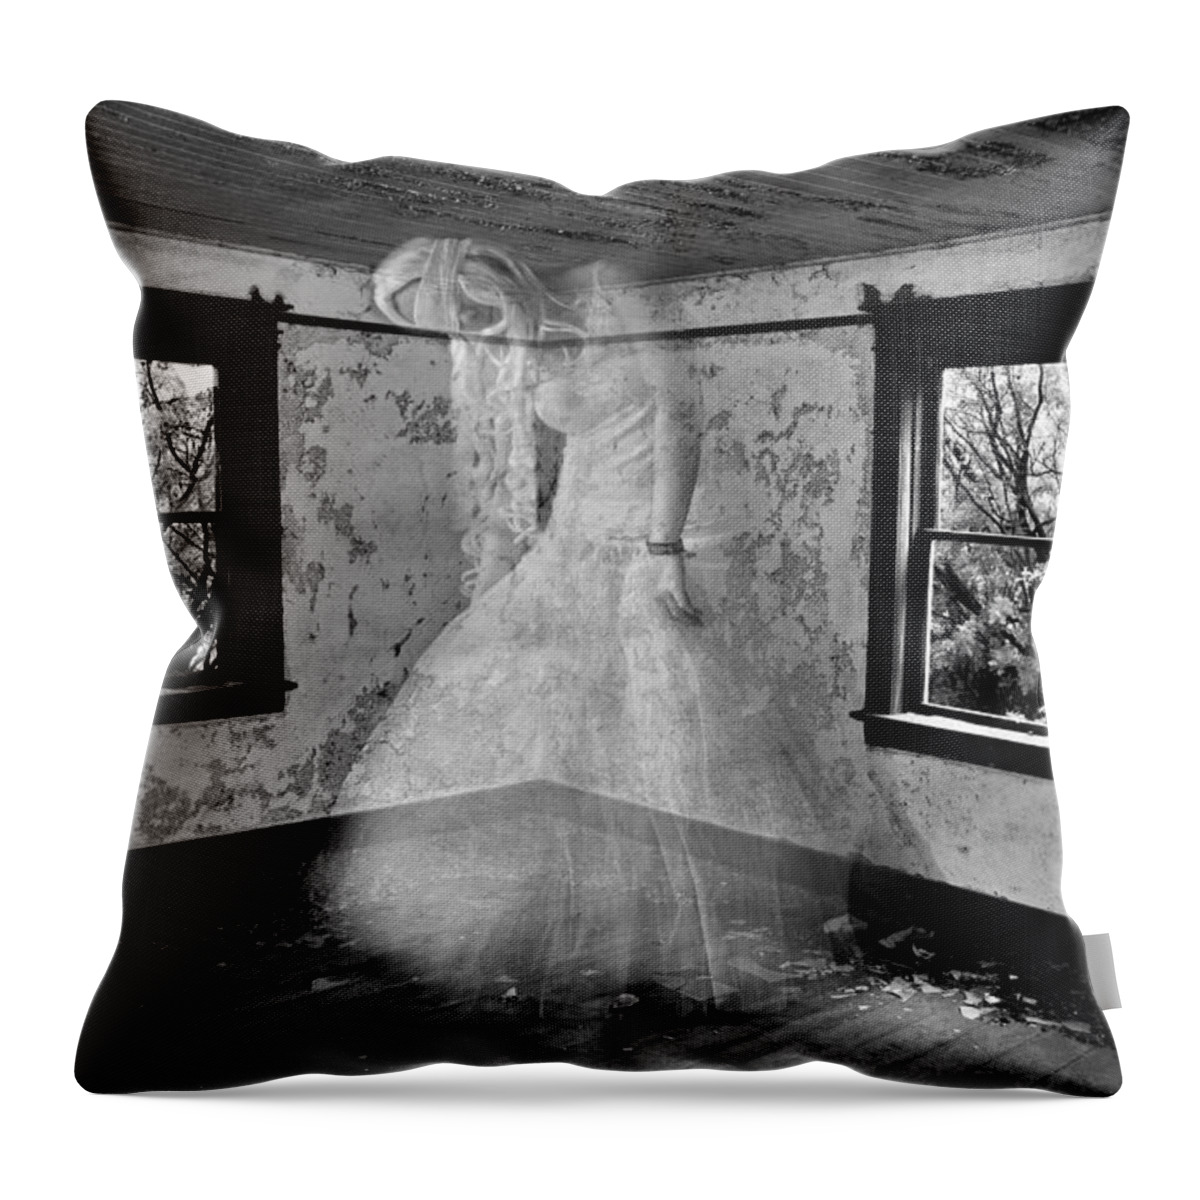 Walls Throw Pillow featuring the photograph Walls That Push by J C